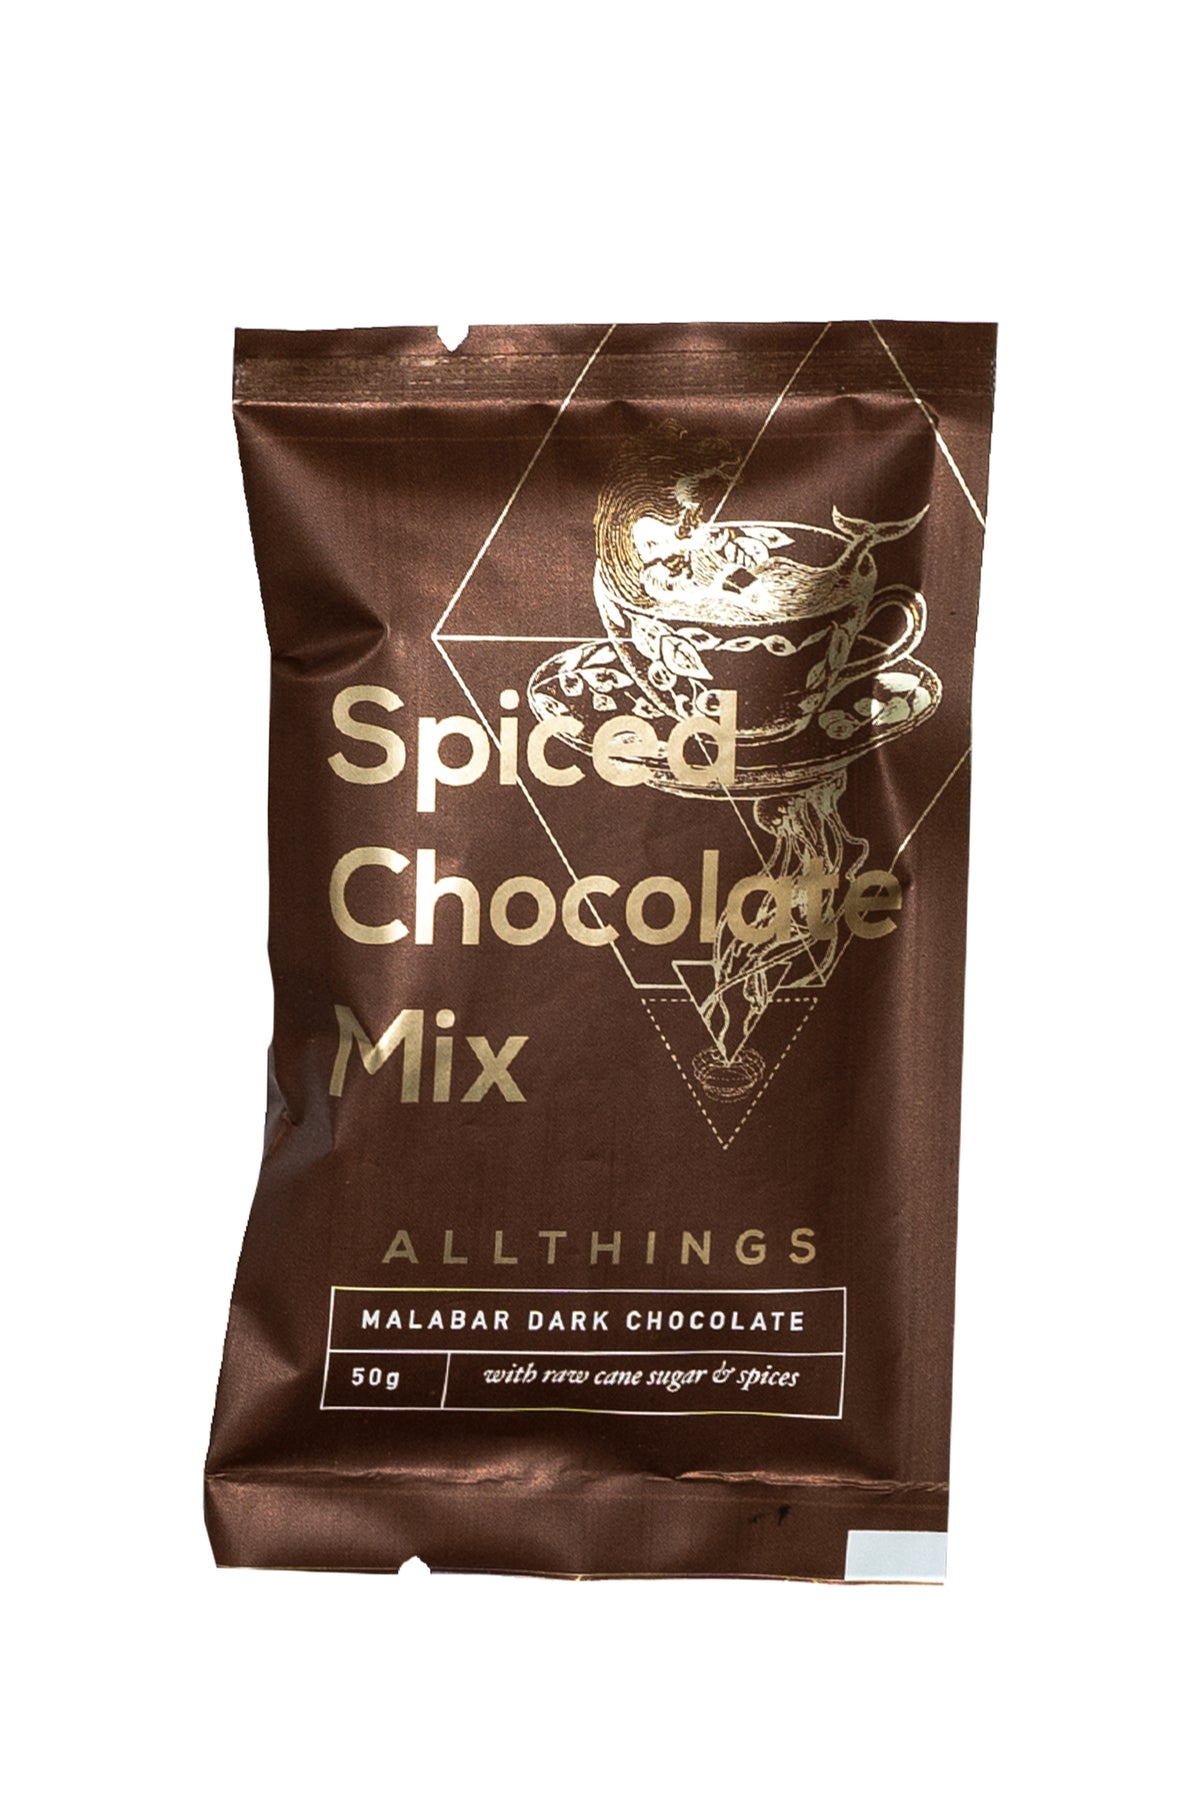 Drinking chocolate powder with spices